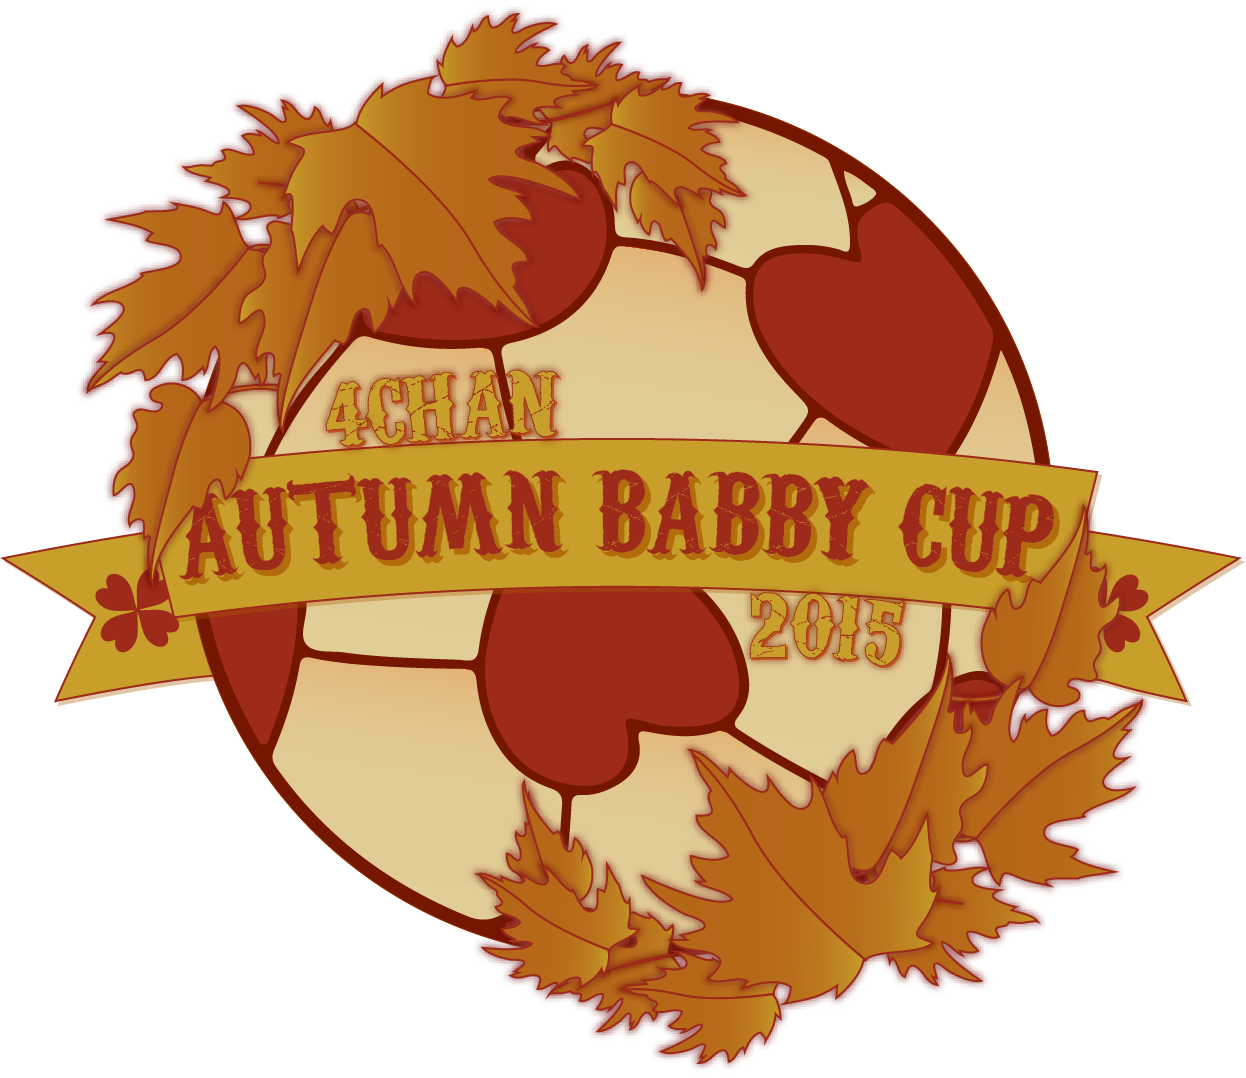 2015 4chan Autumn Babby Cup